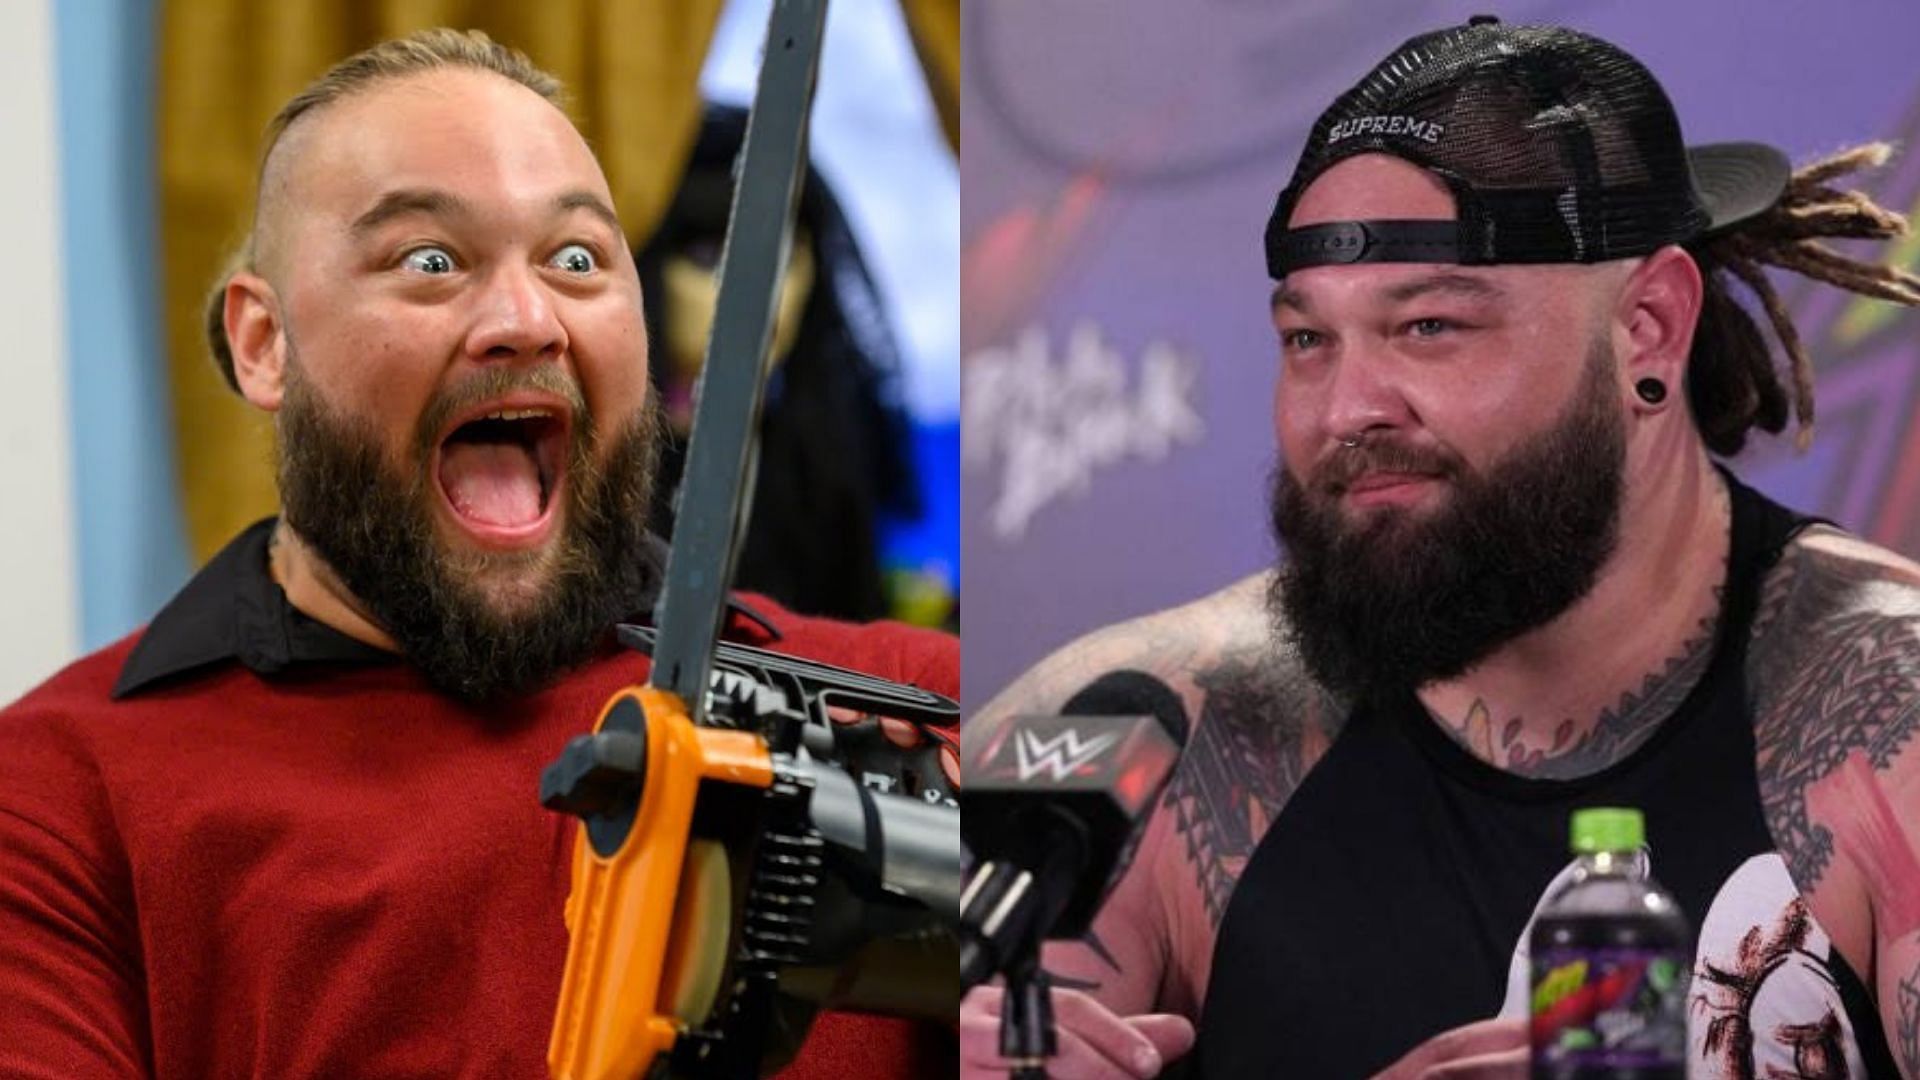 Bray Wyatt returned to WWE at Extreme Rules 2022.